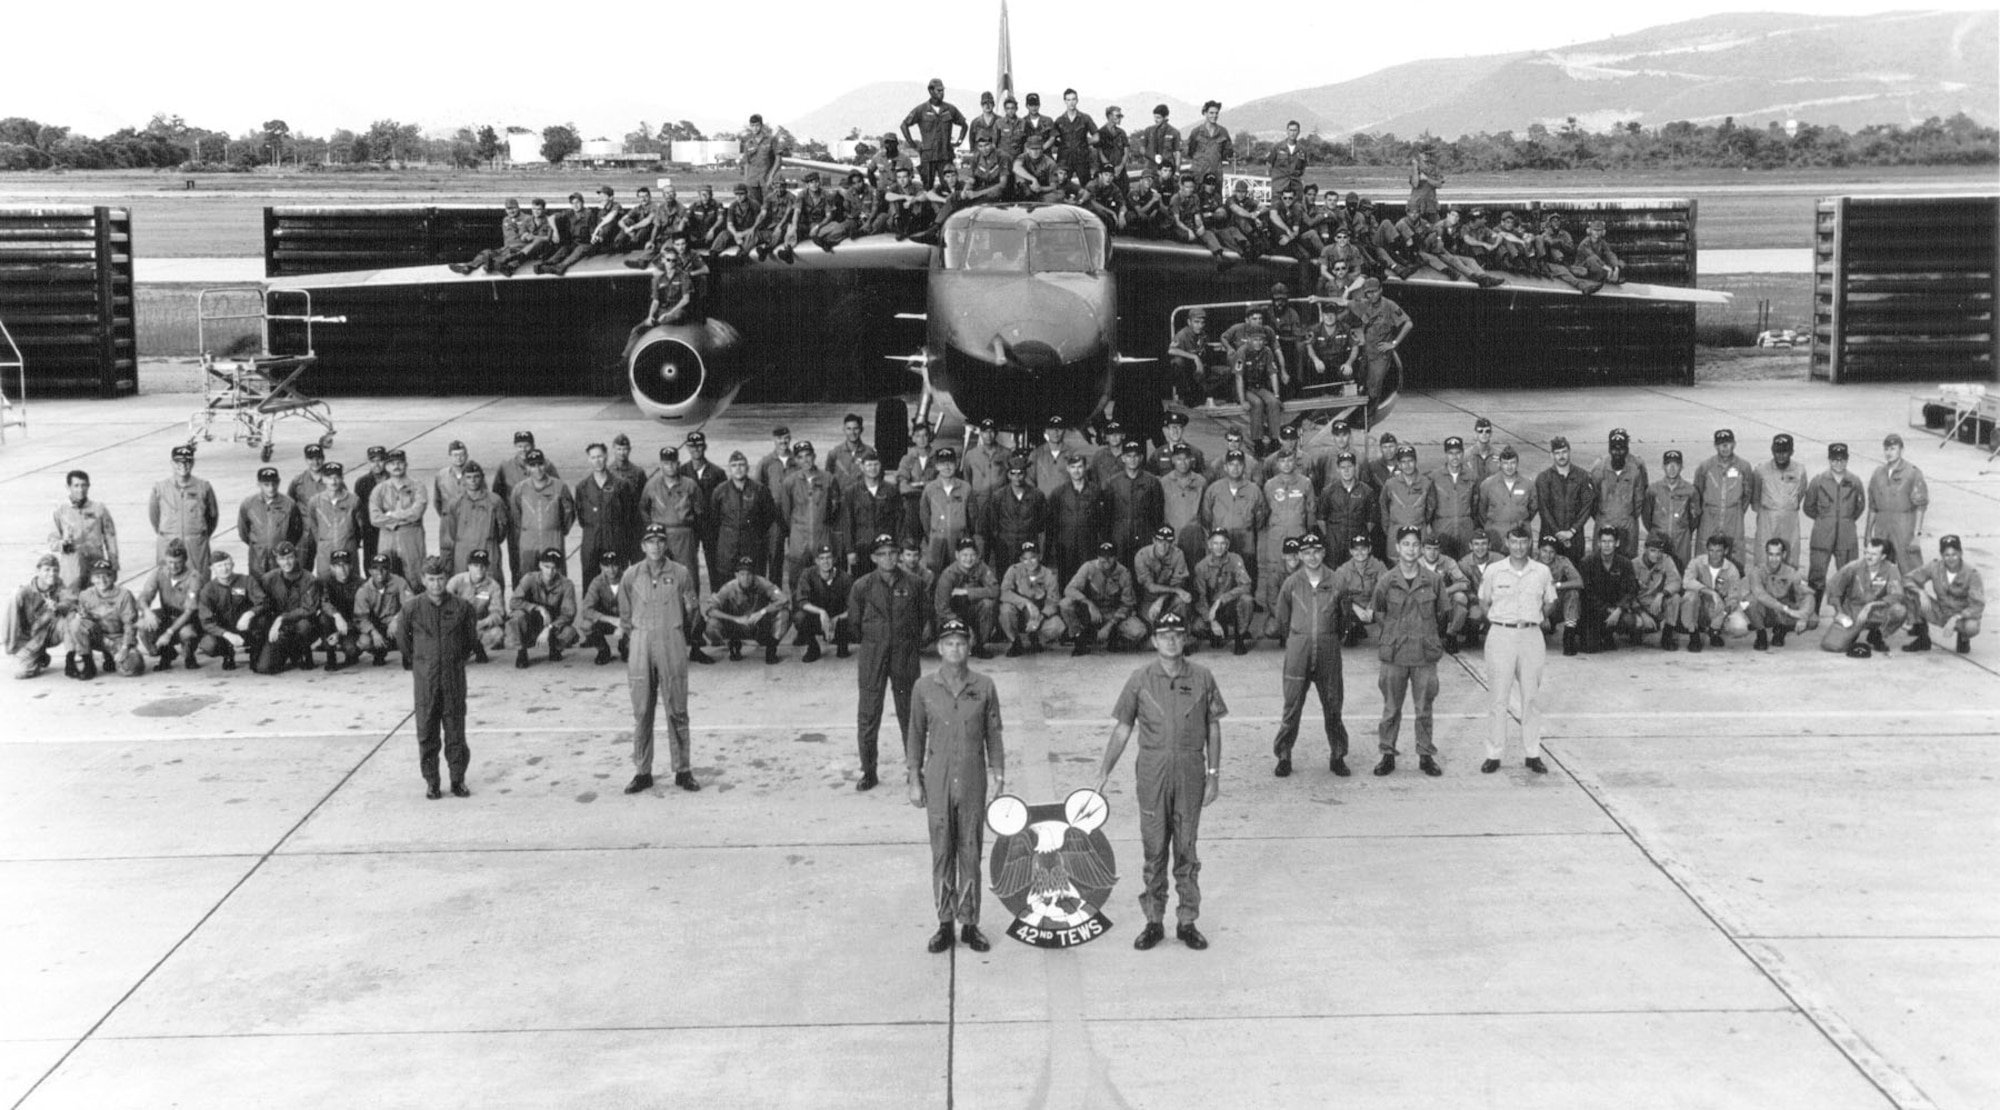 Personnel of the 42nd Tactical Electronic Warfare Squadron at Takhli in 1970. Aircrew are on the ground and maintenance personnel are on the aircraft. (U.S. Air Force photo)